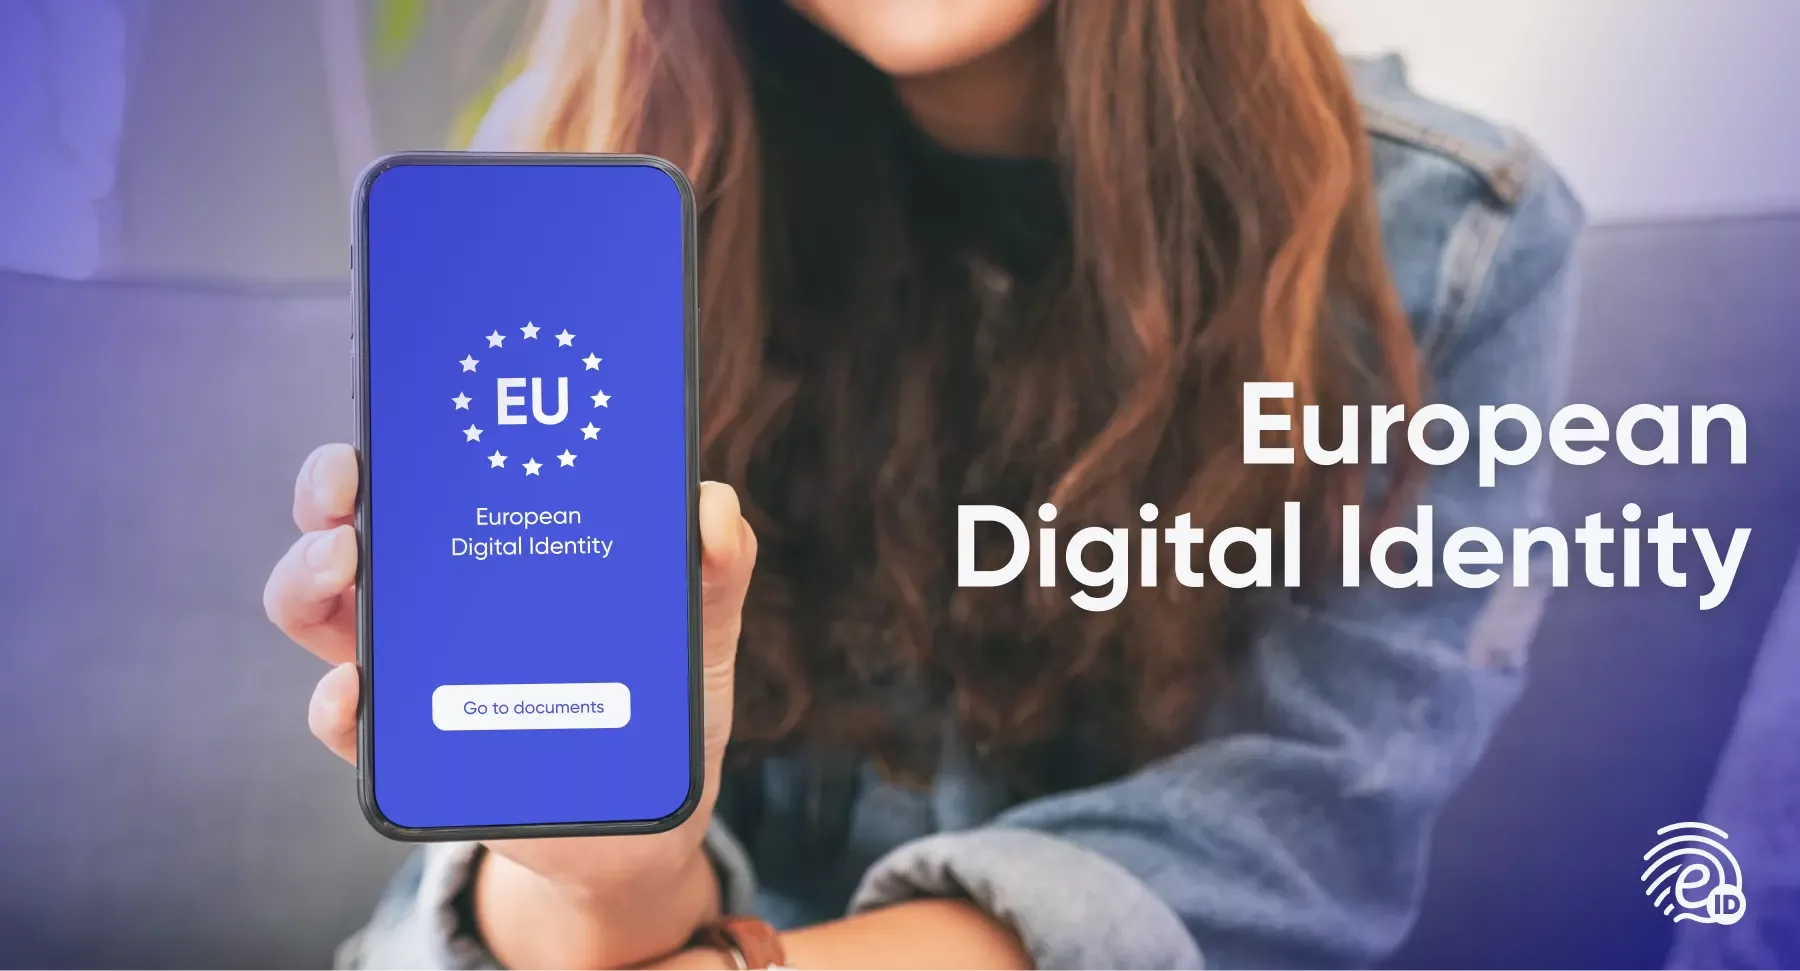 The European Commission's Digital Identity Wallet